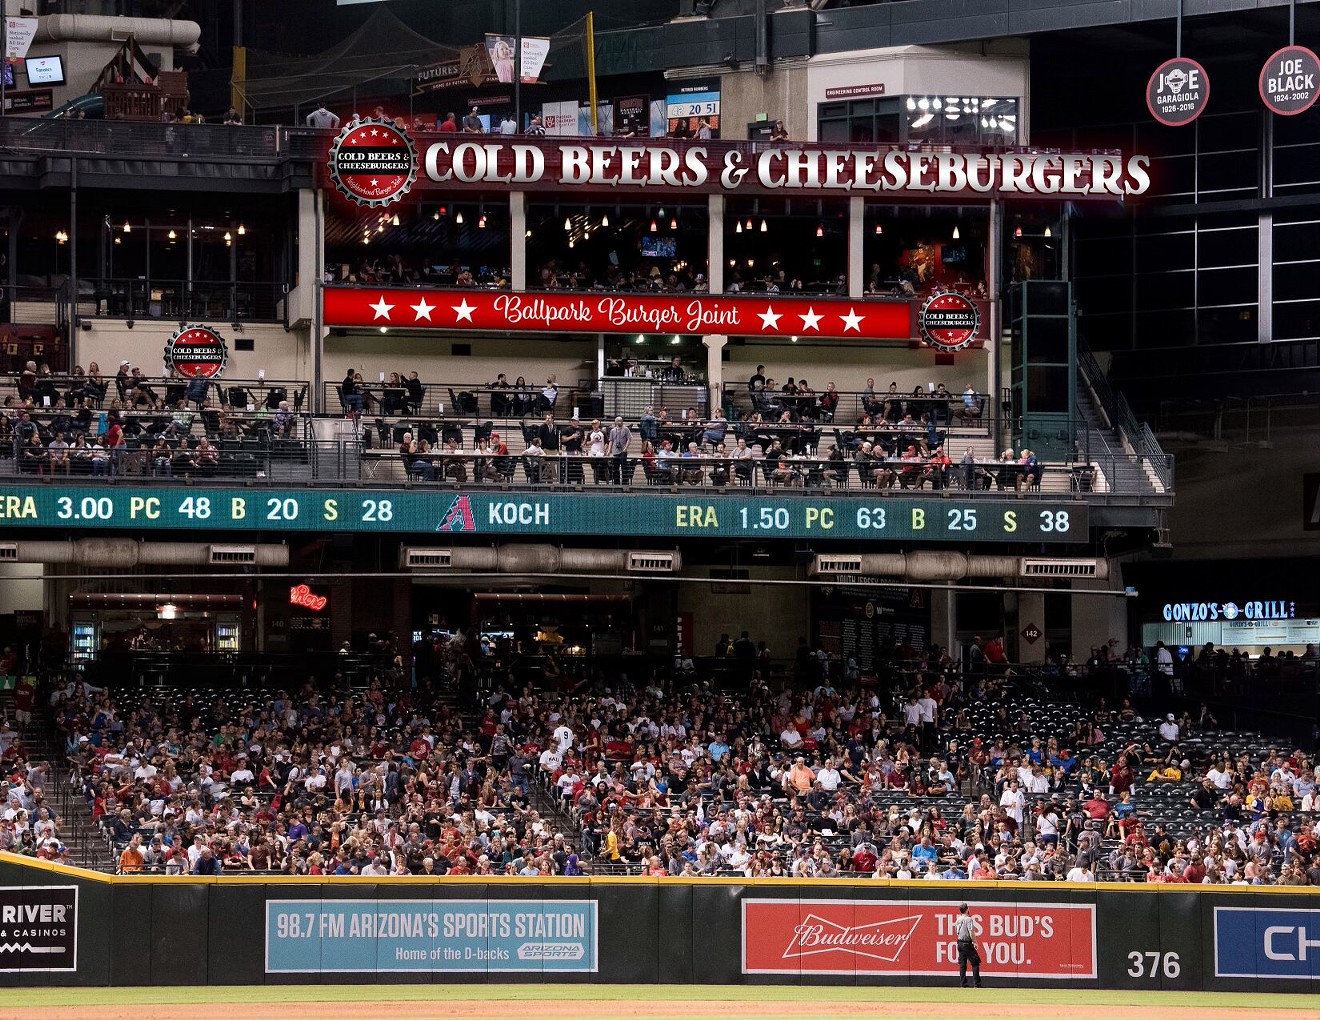 Cold Beers & Cheeseburgers will be located on the top deck at Chase Field.